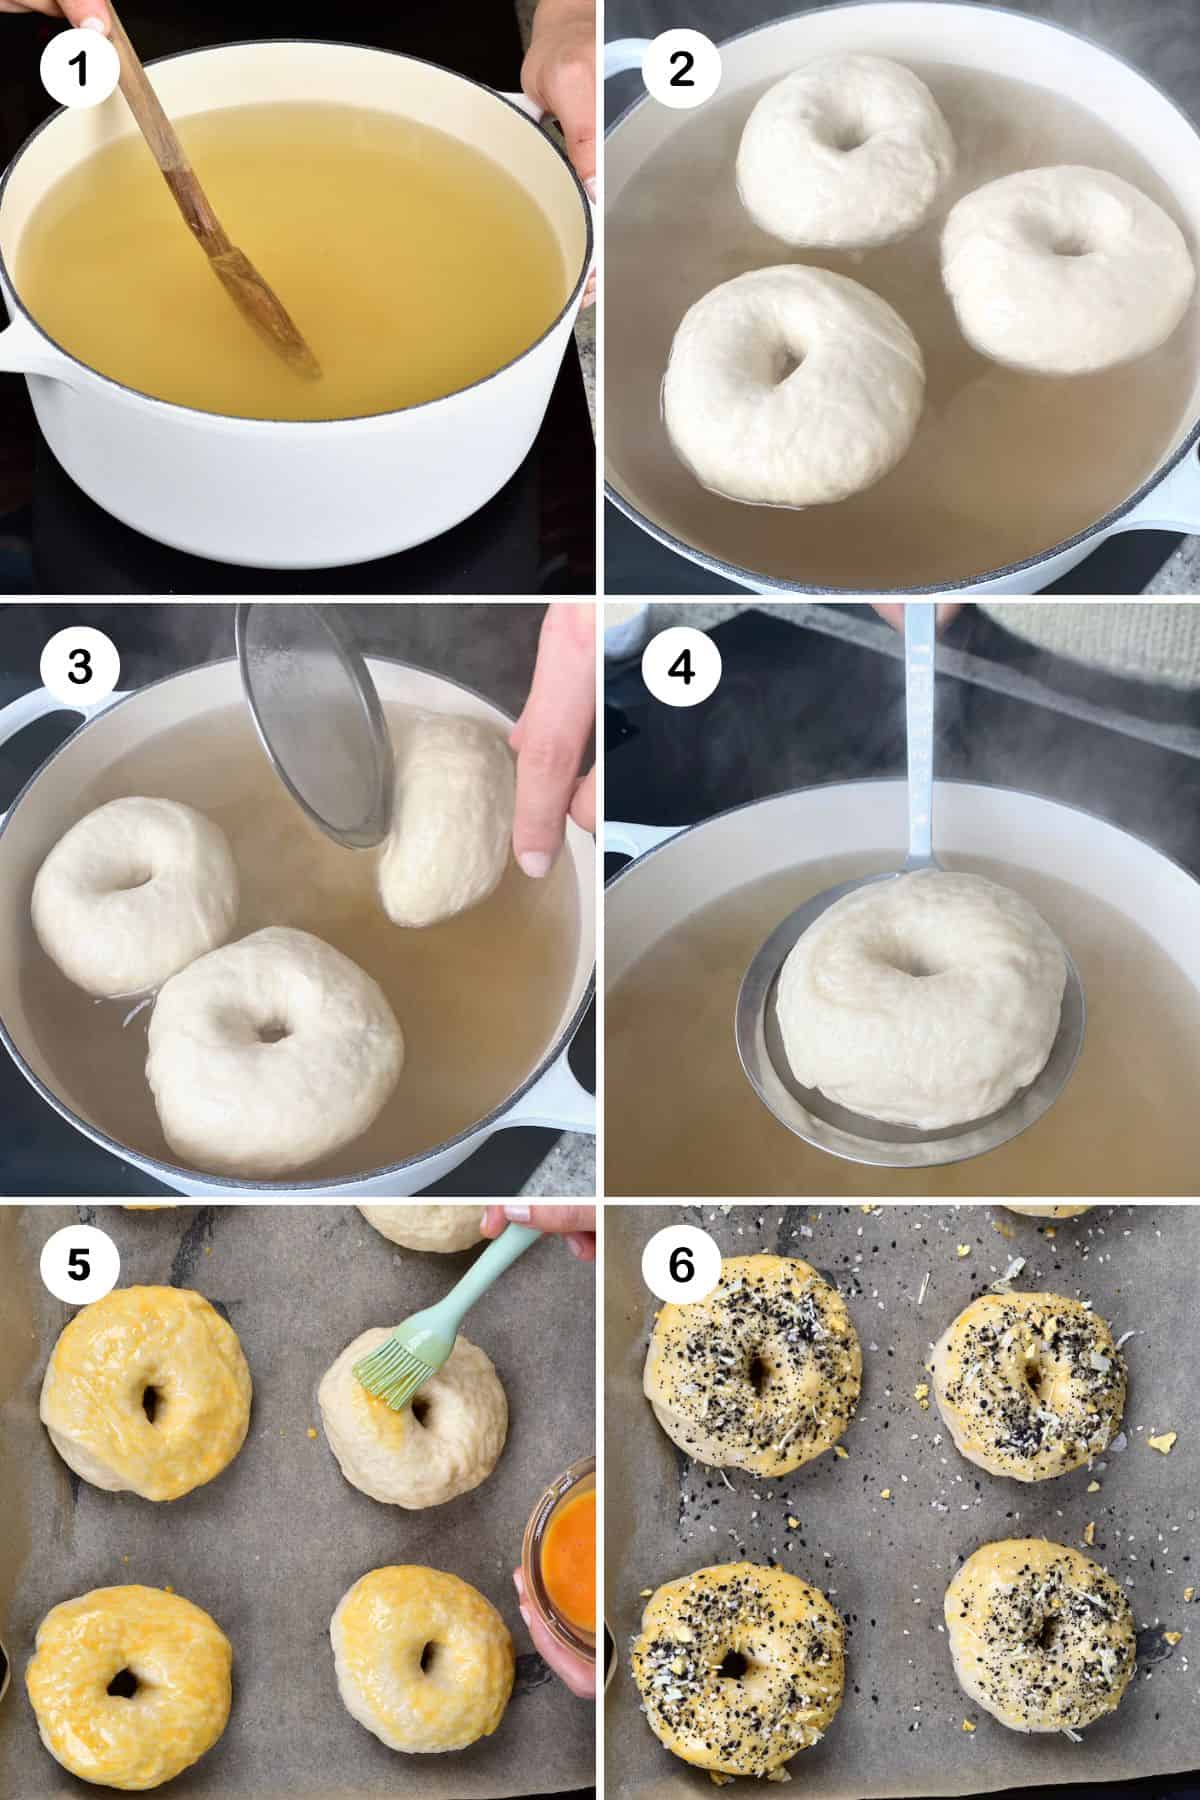 Steps for poaching and glazing bagels